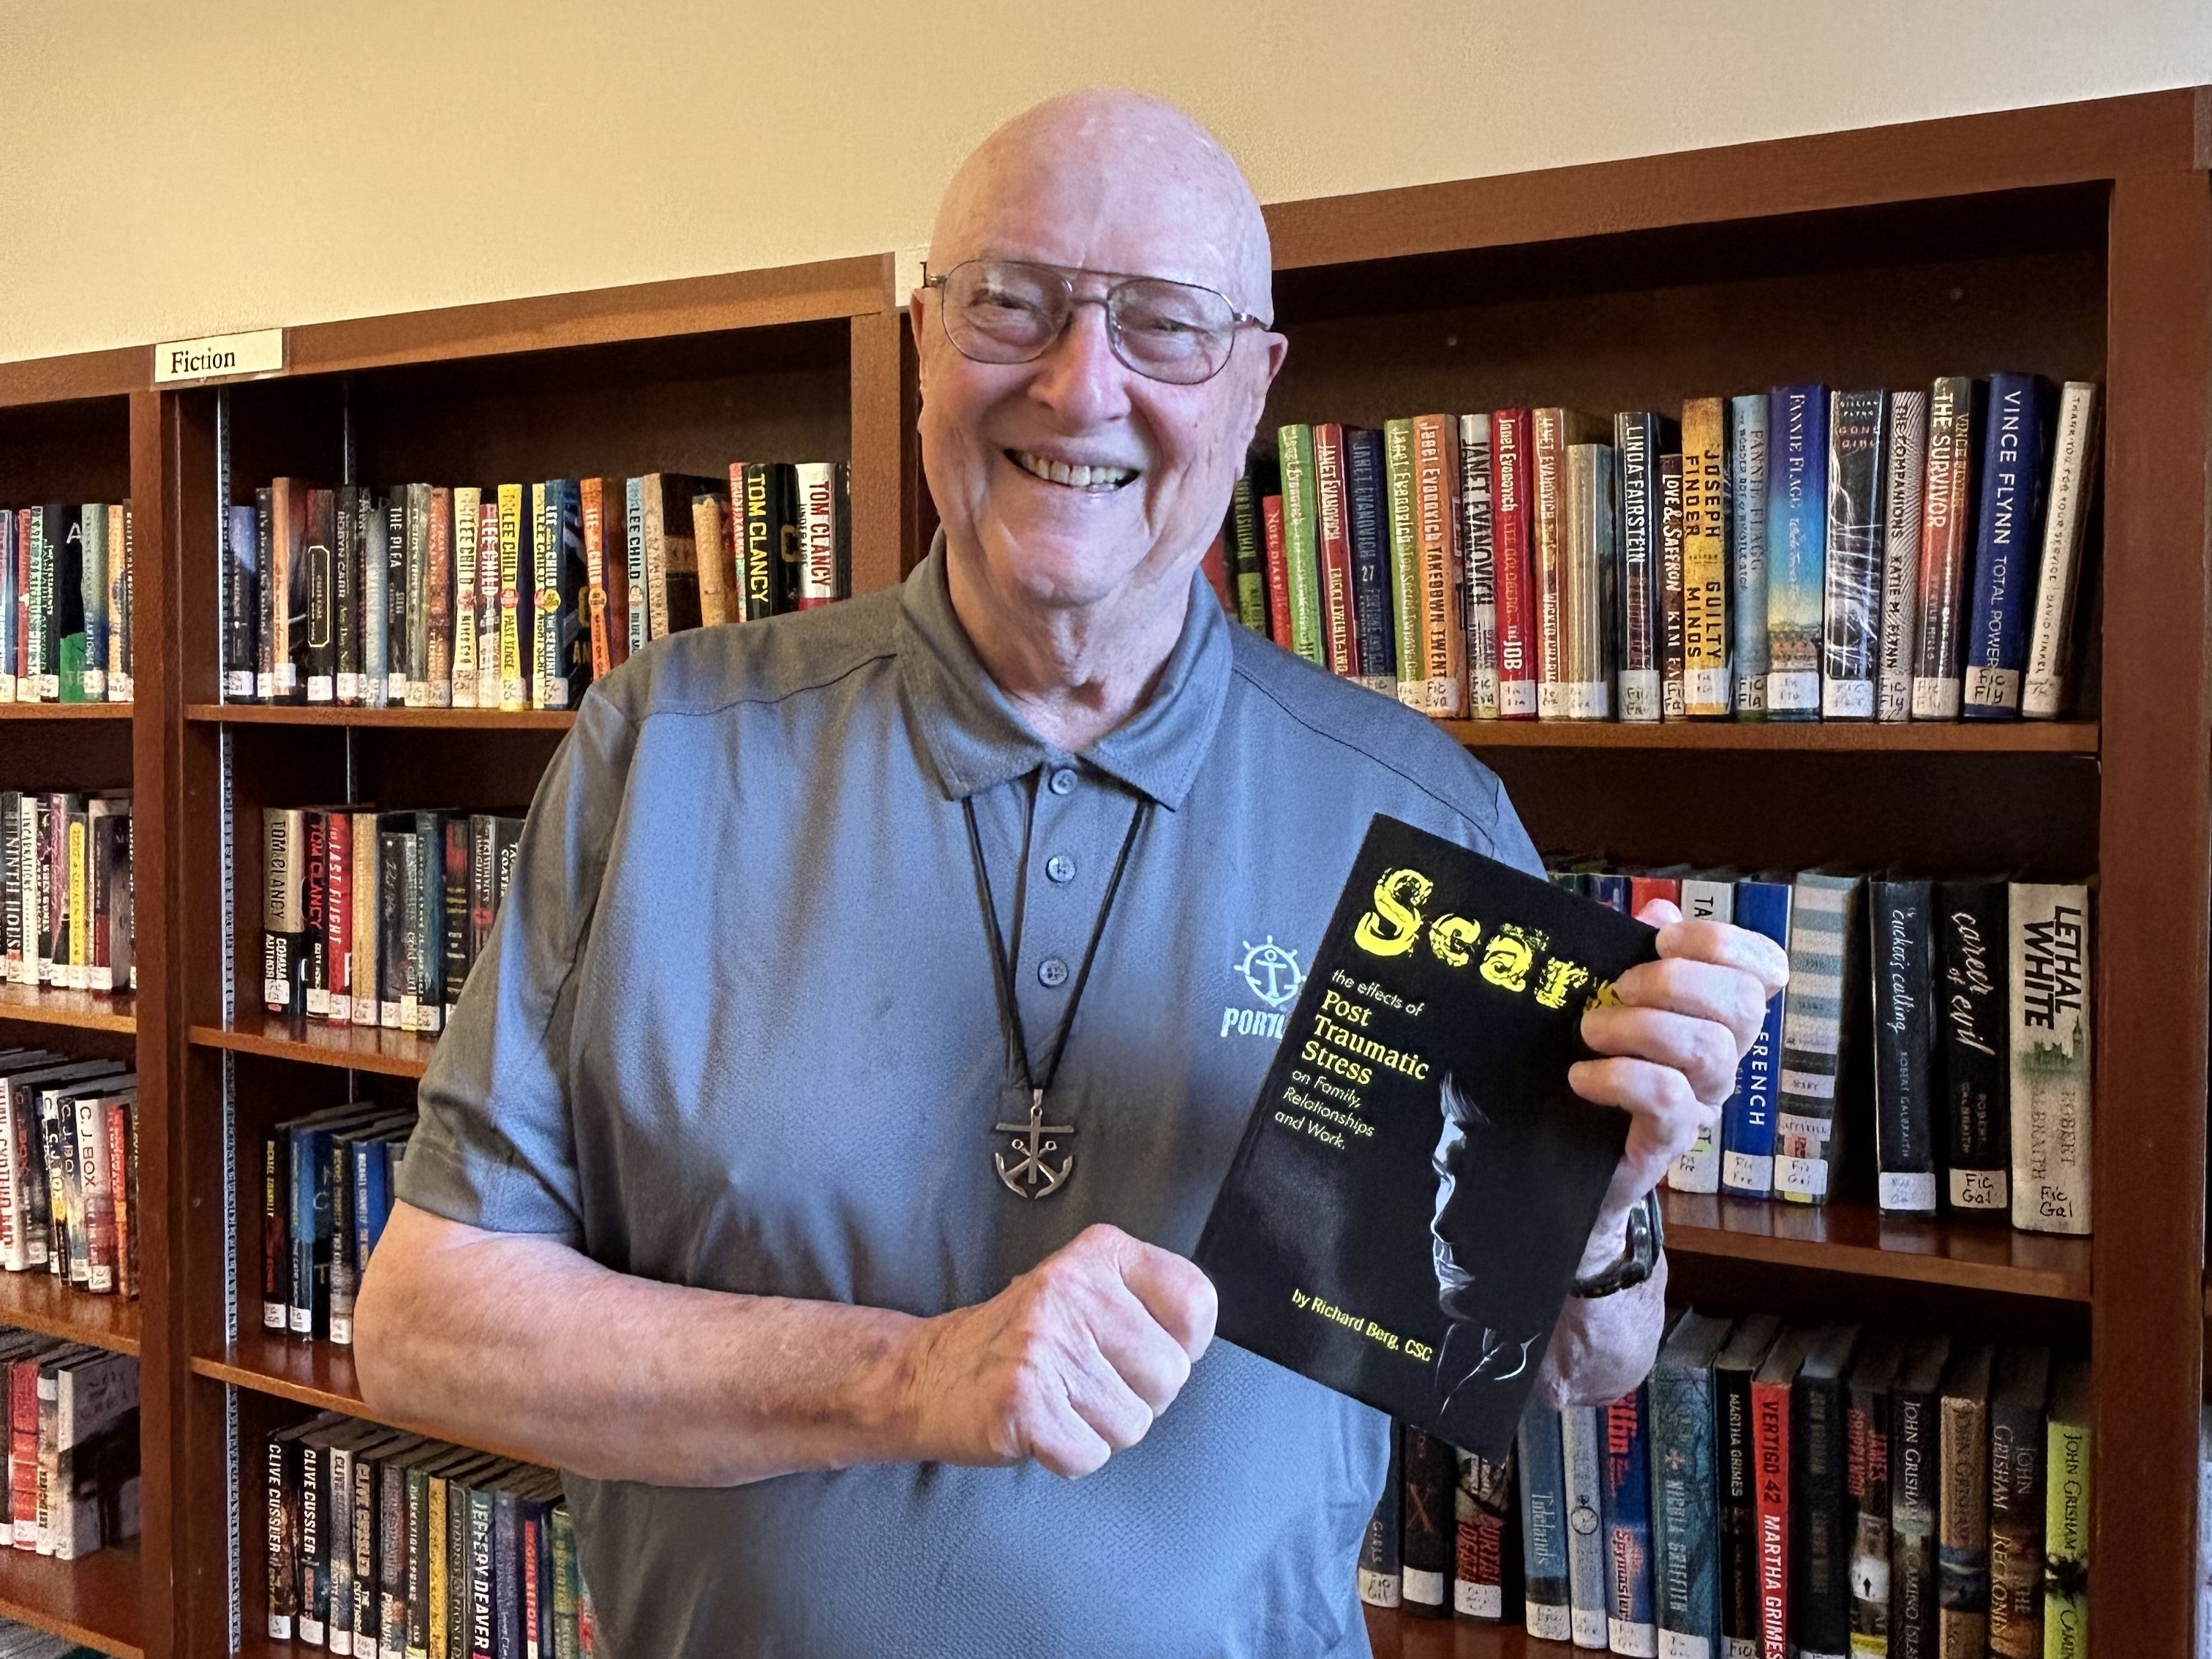 Father Berg stands smiling in a library holding a copy of his book "Scars"